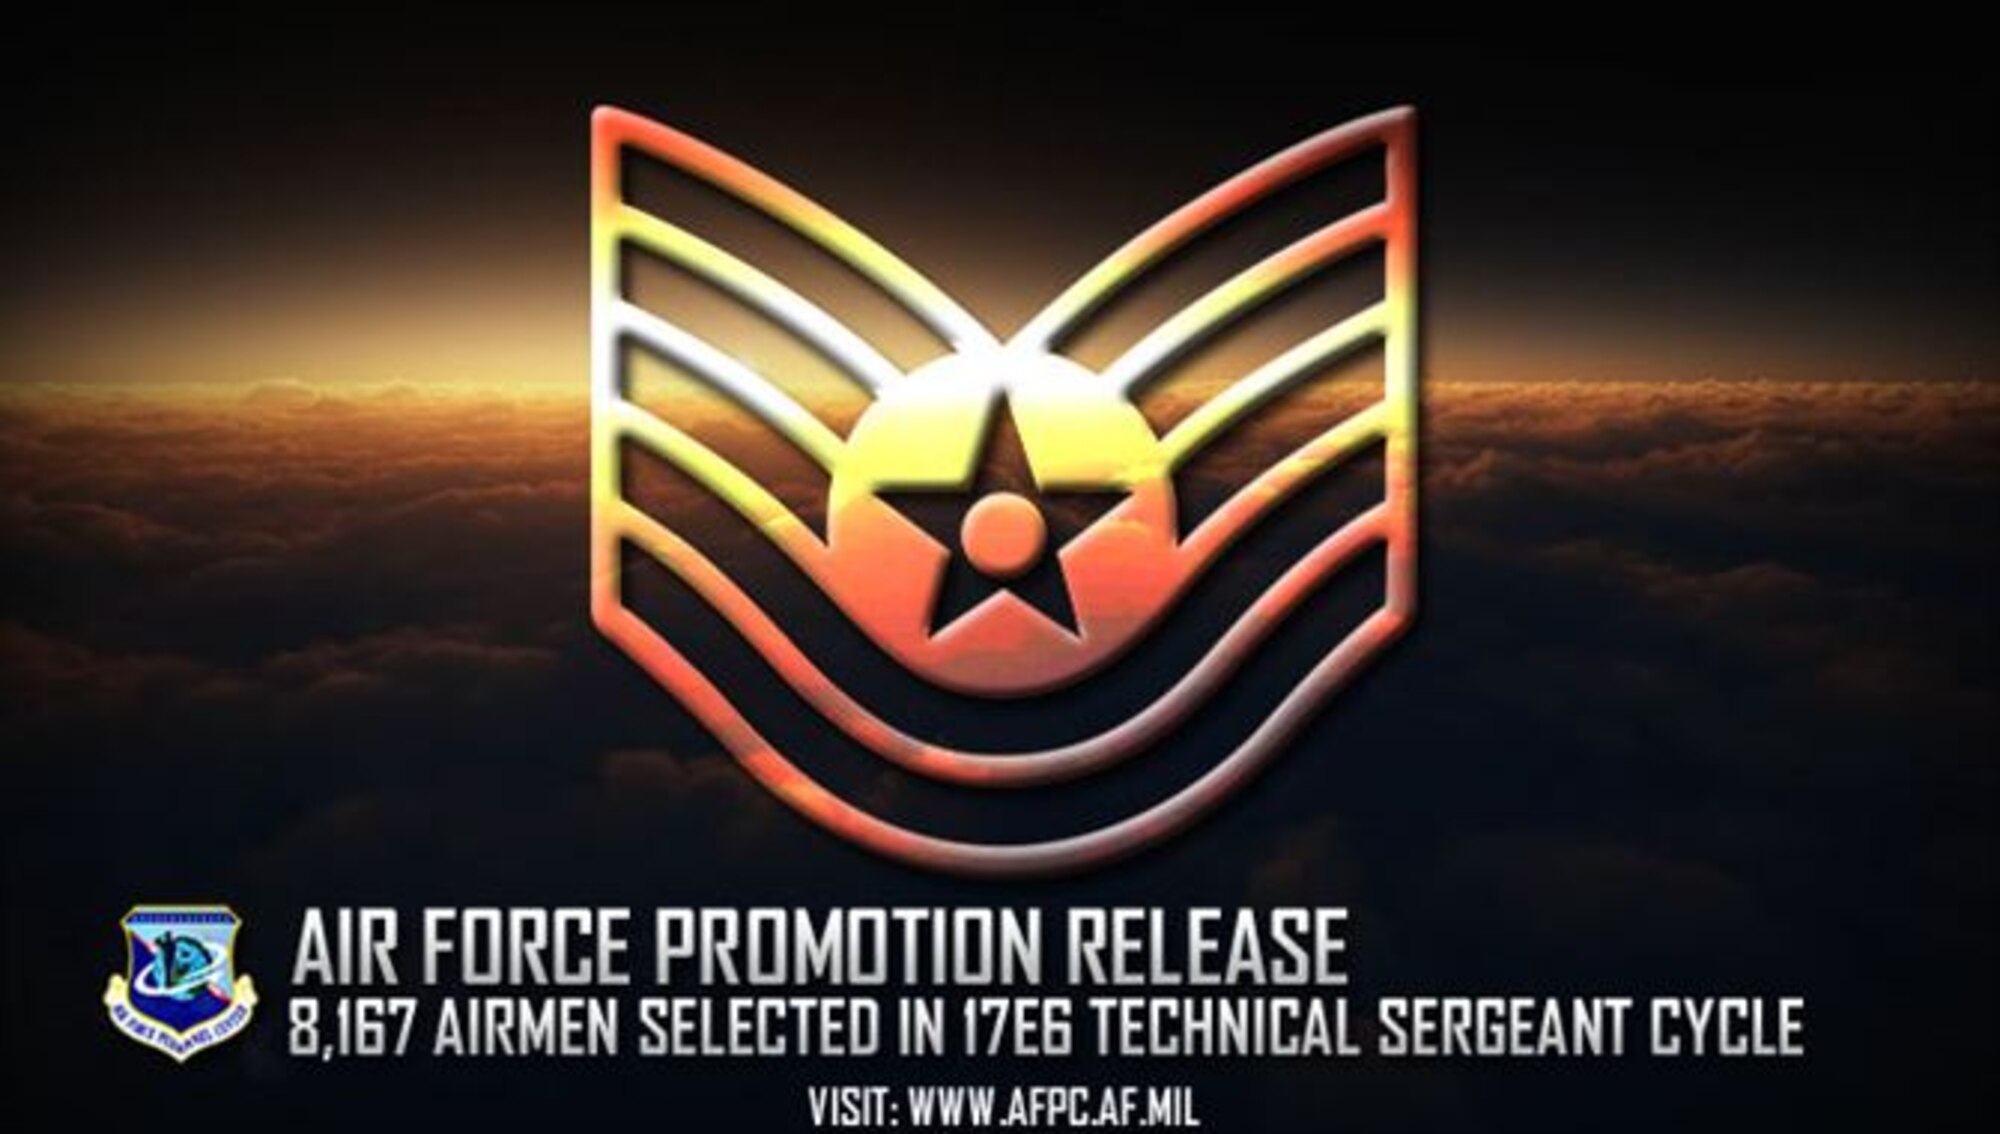 Congratulations to the 320 Sheppard Airmen selected for technical sergeant in the 17E6 promotion cycle. The full list is available on myPers and the Air Force Portal. (U.S. Air Force graphic by Staff Sgt. Alexx Pons)